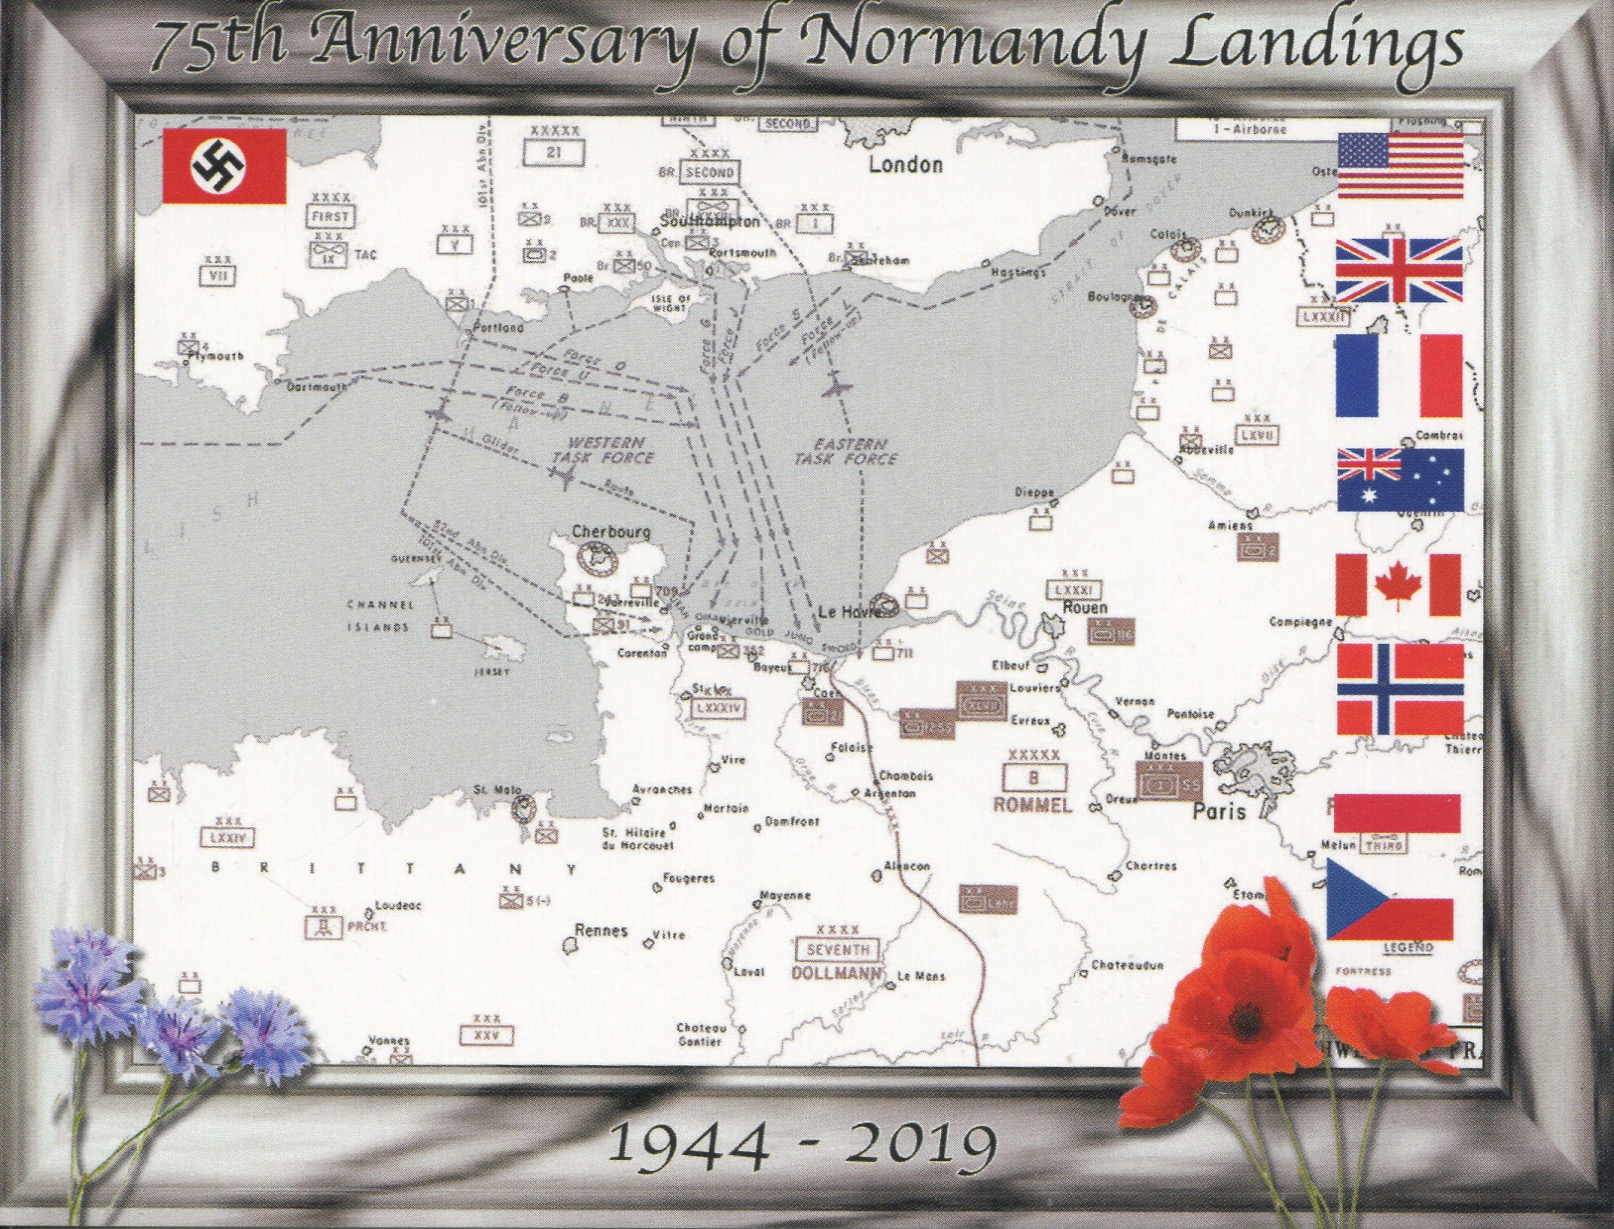 75th Anniversary of Normandy Landings (D-Day)